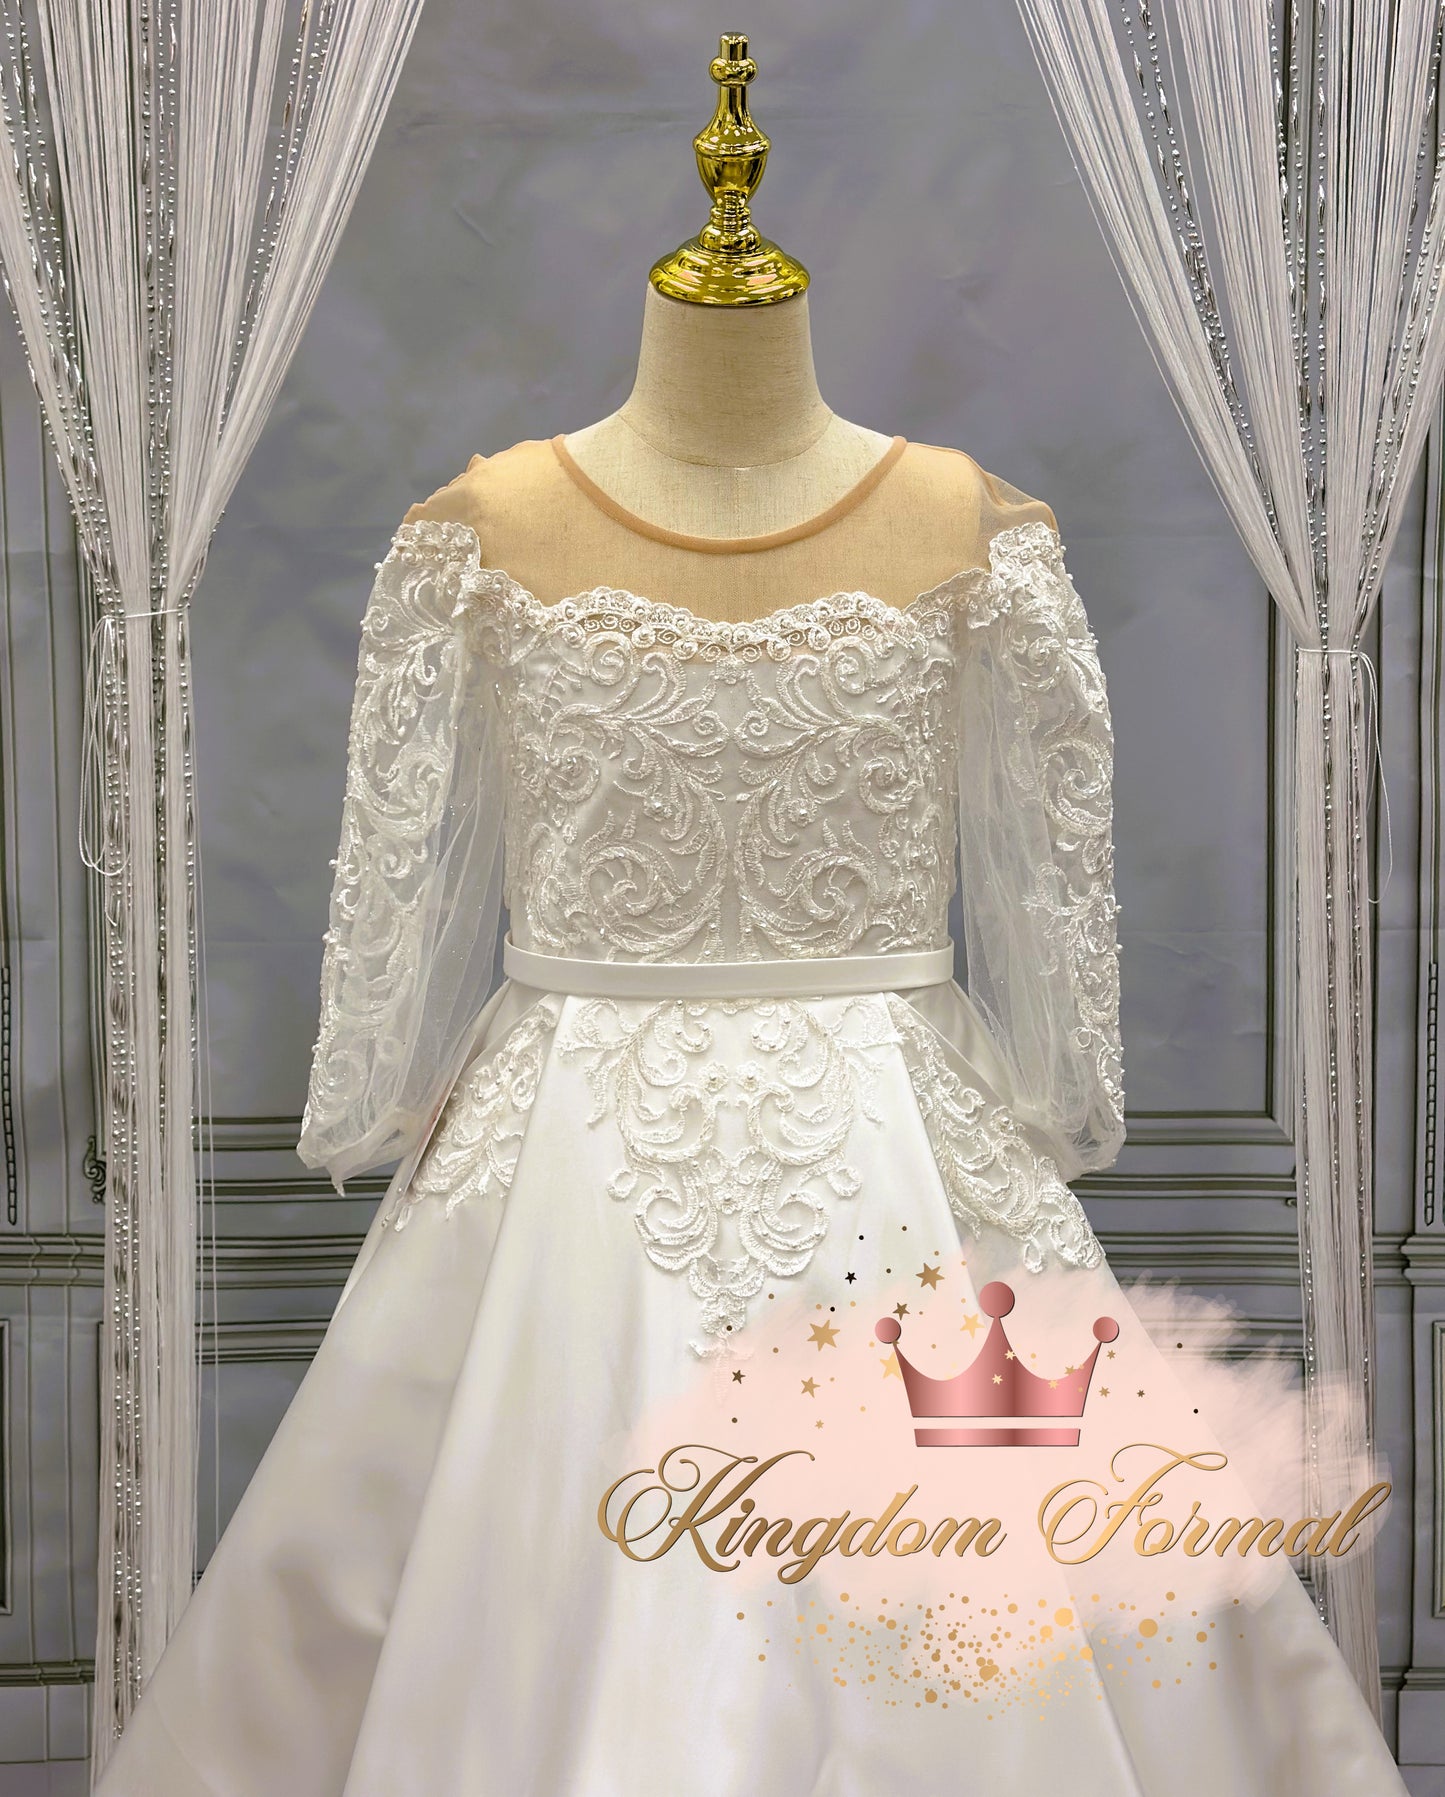 The Kaydee Gown